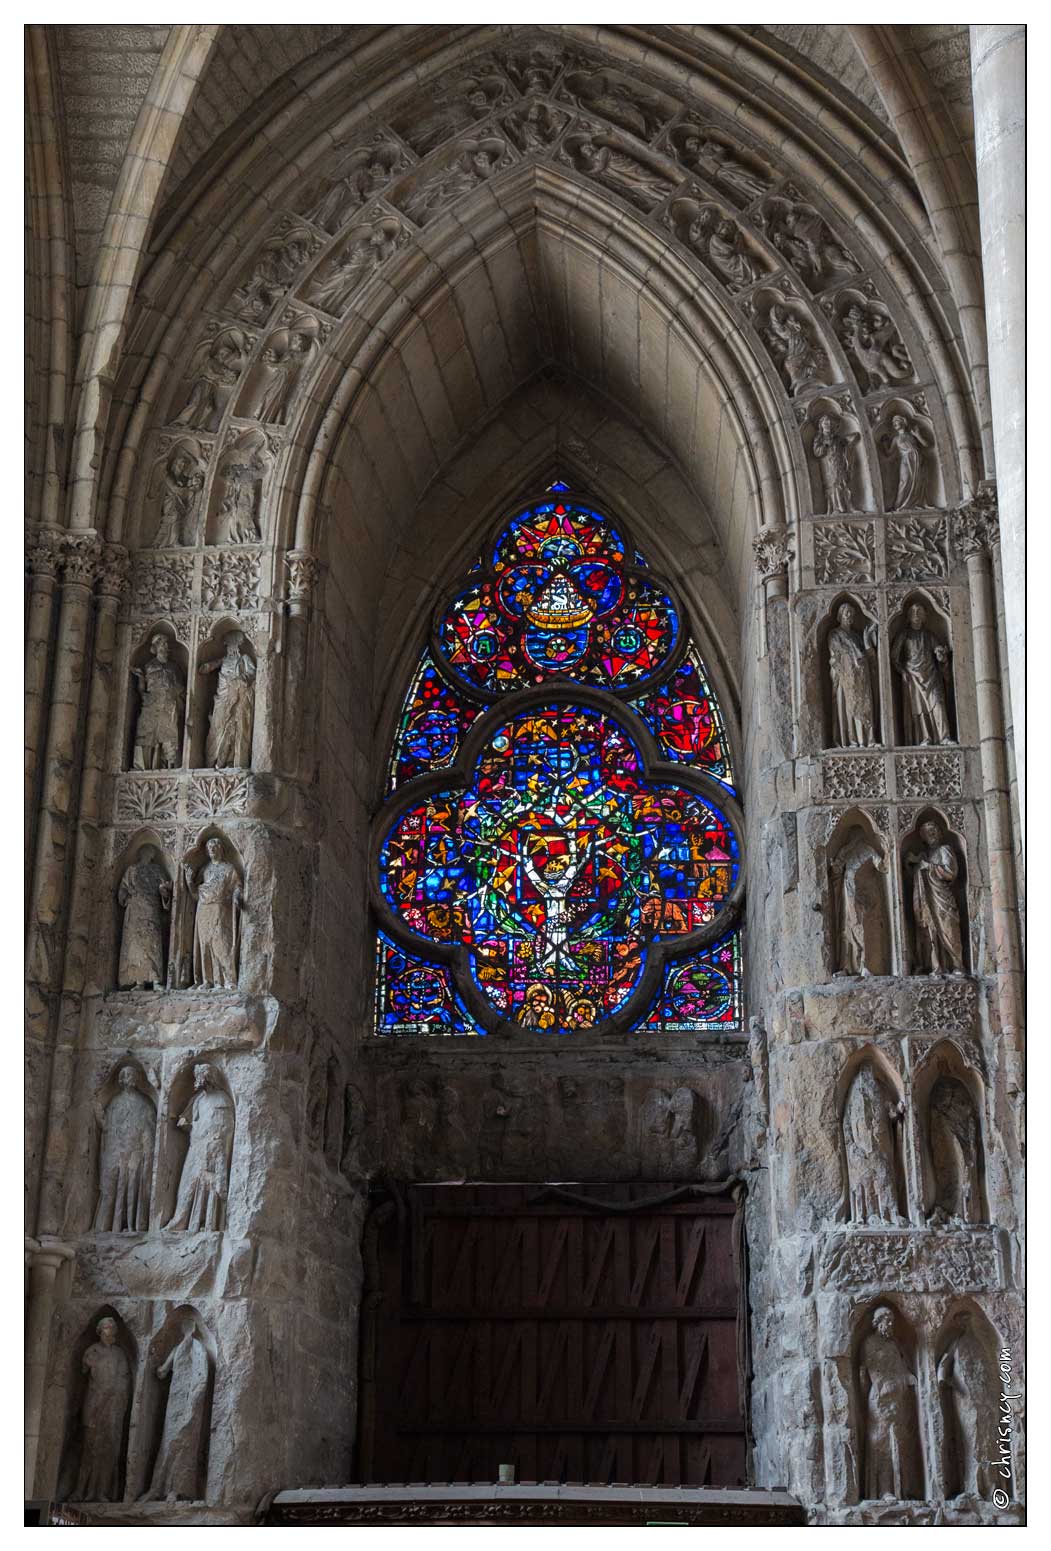 20150406-18_0186-Reims_Cathedrale.jpg